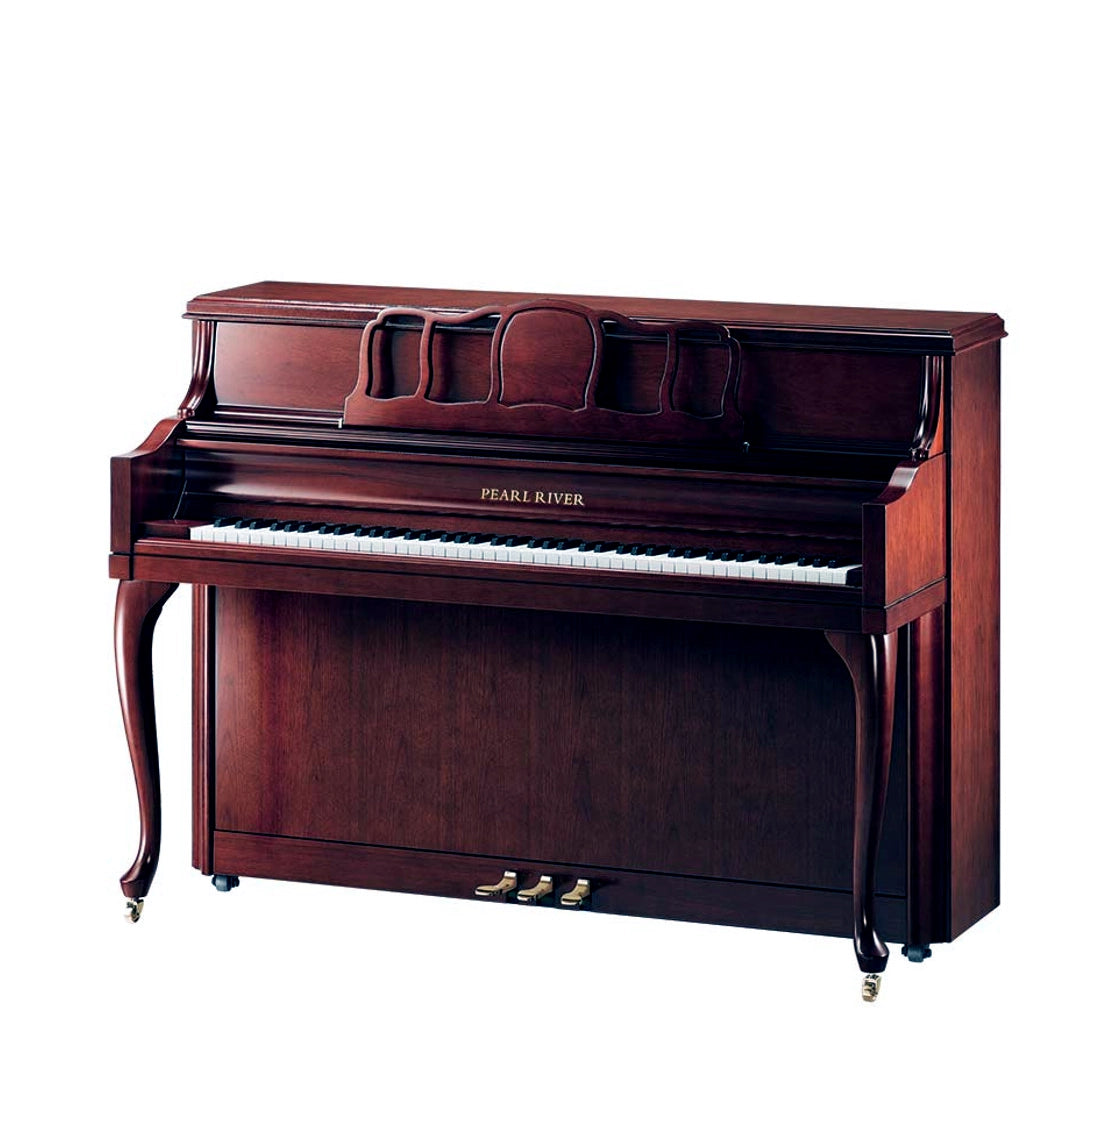 Pearl River EU111PA American Styled French Provincial Piano